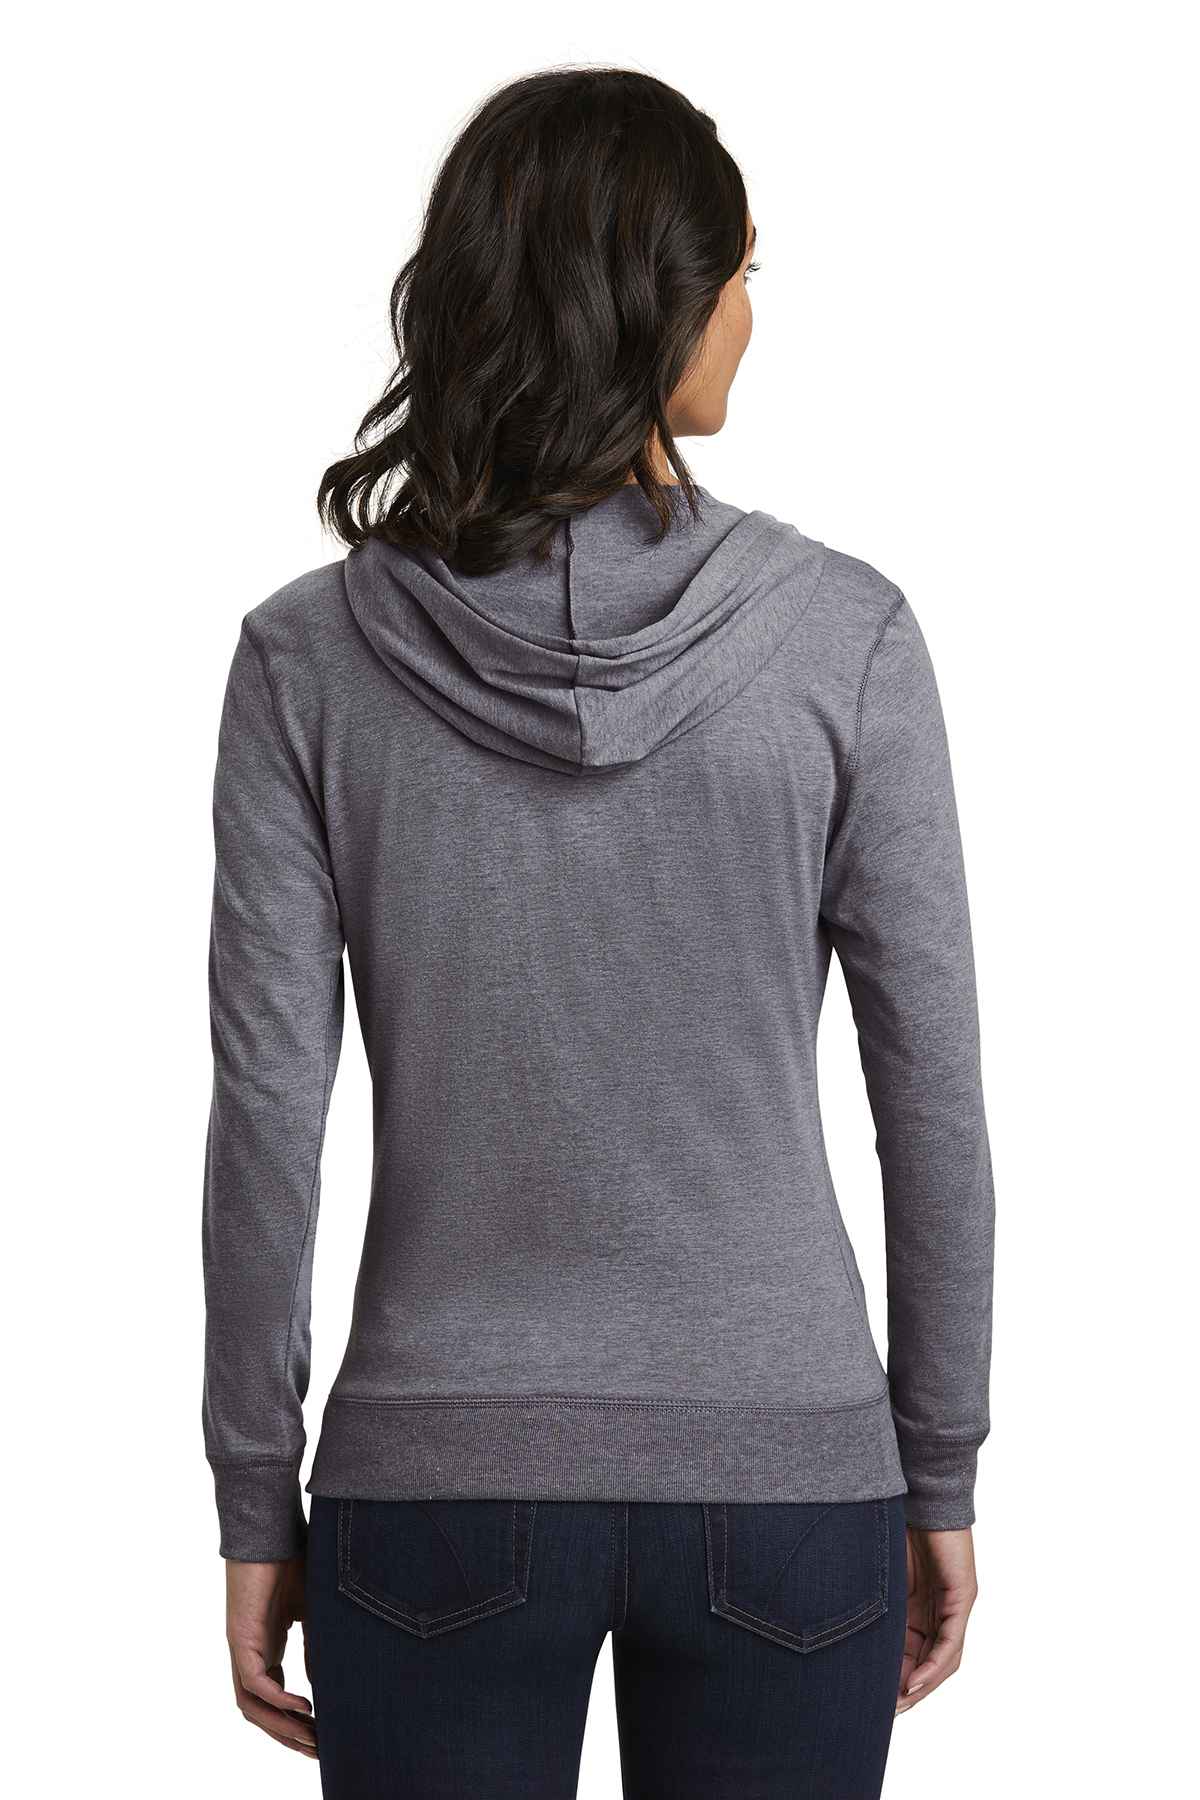 District Women’s Fitted Jersey Full-Zip Hoodie | Product | District